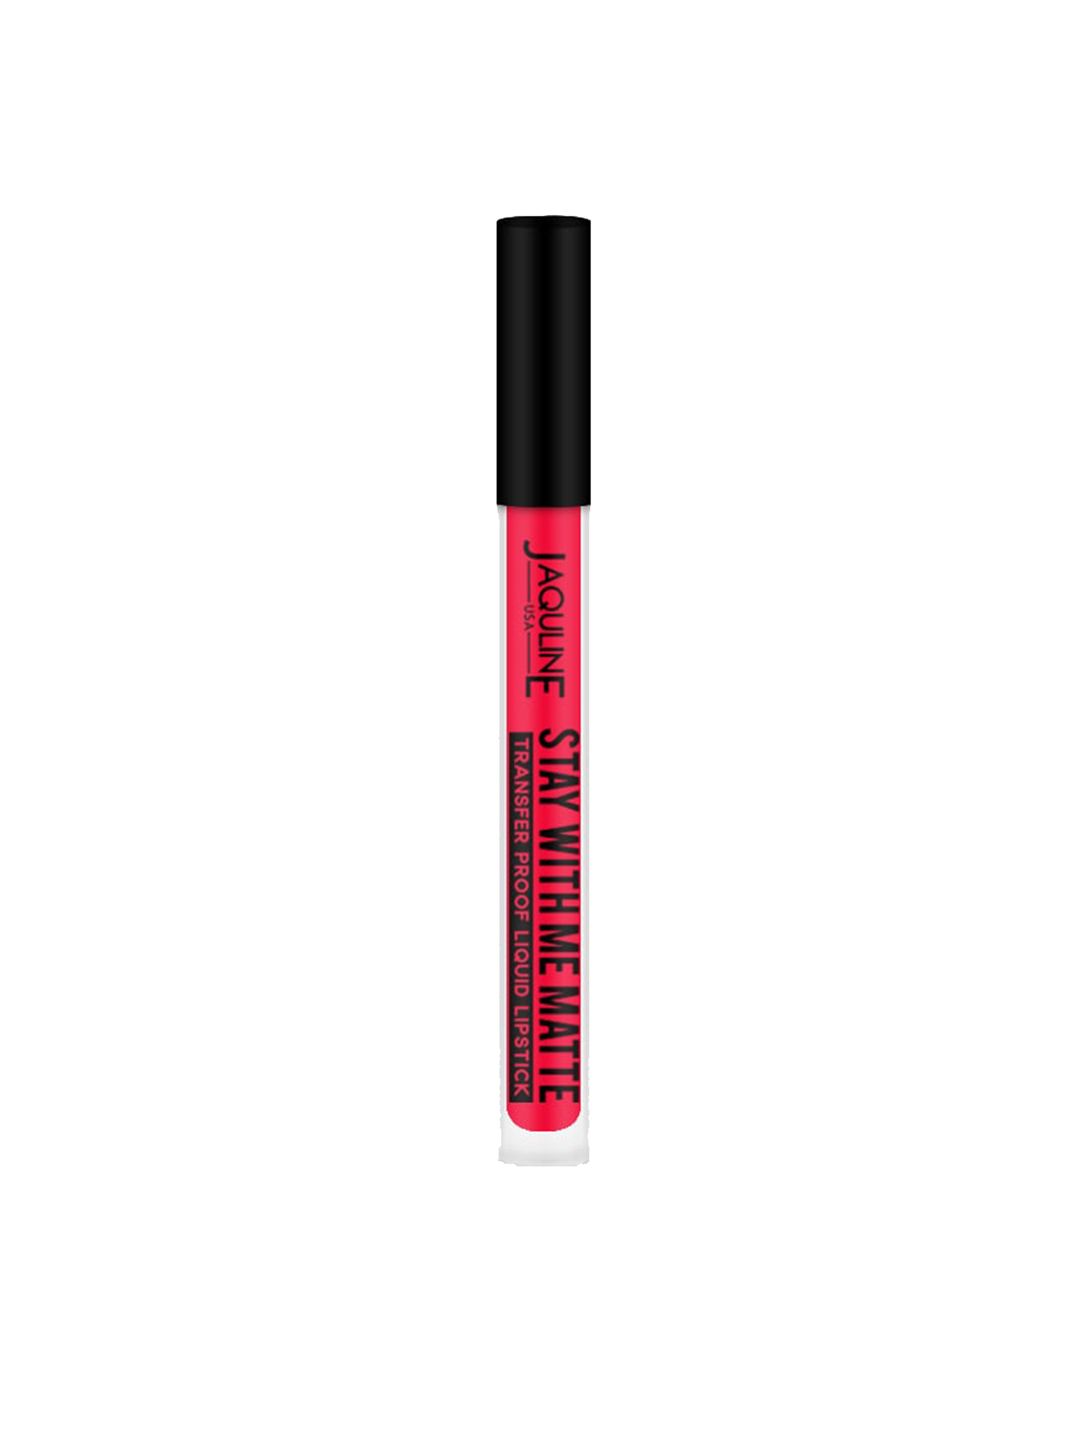 Jaquline USA Stay With Me Liquid Lipstick - Rebel 3ml Price in India